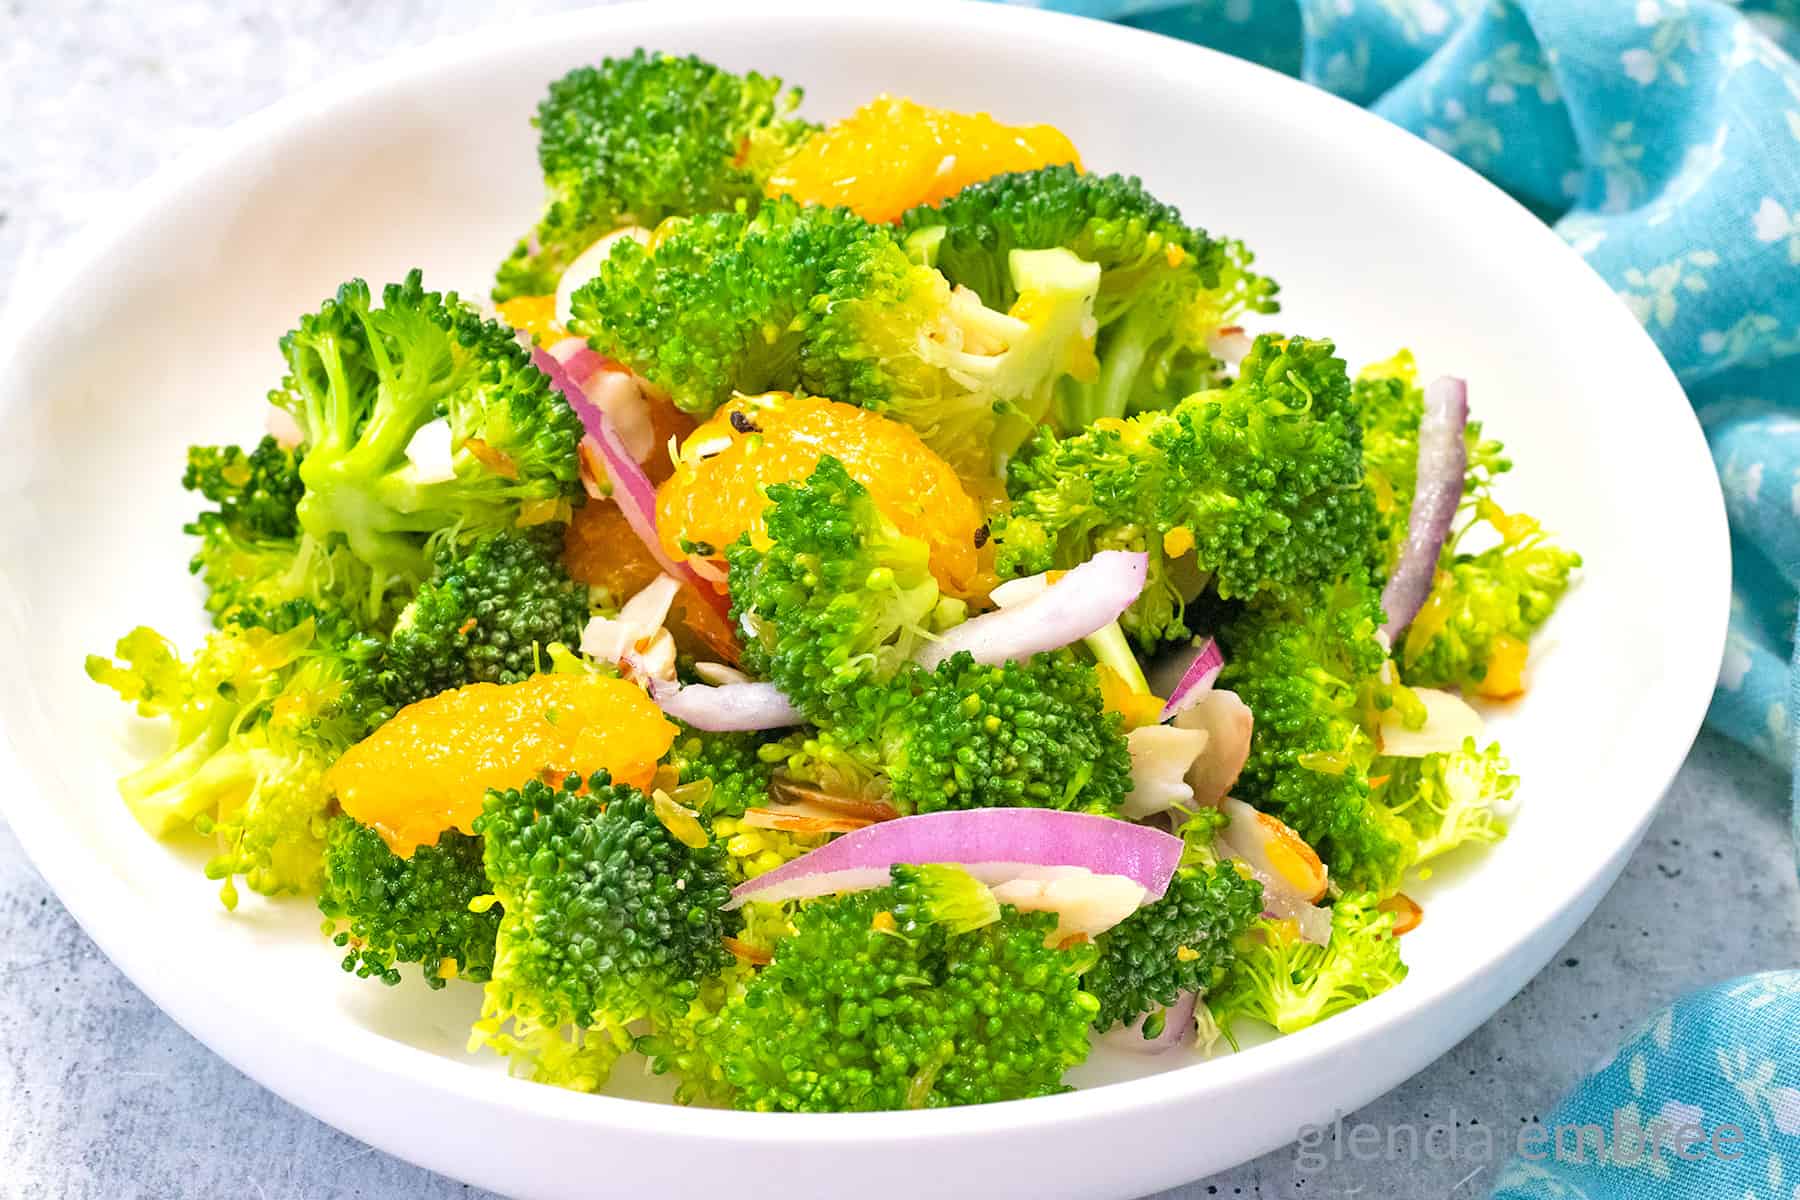 Crunchy Broccoli Salad with Mandarin Oranges on a white plate.  A quick and easy potluck recipe idea.